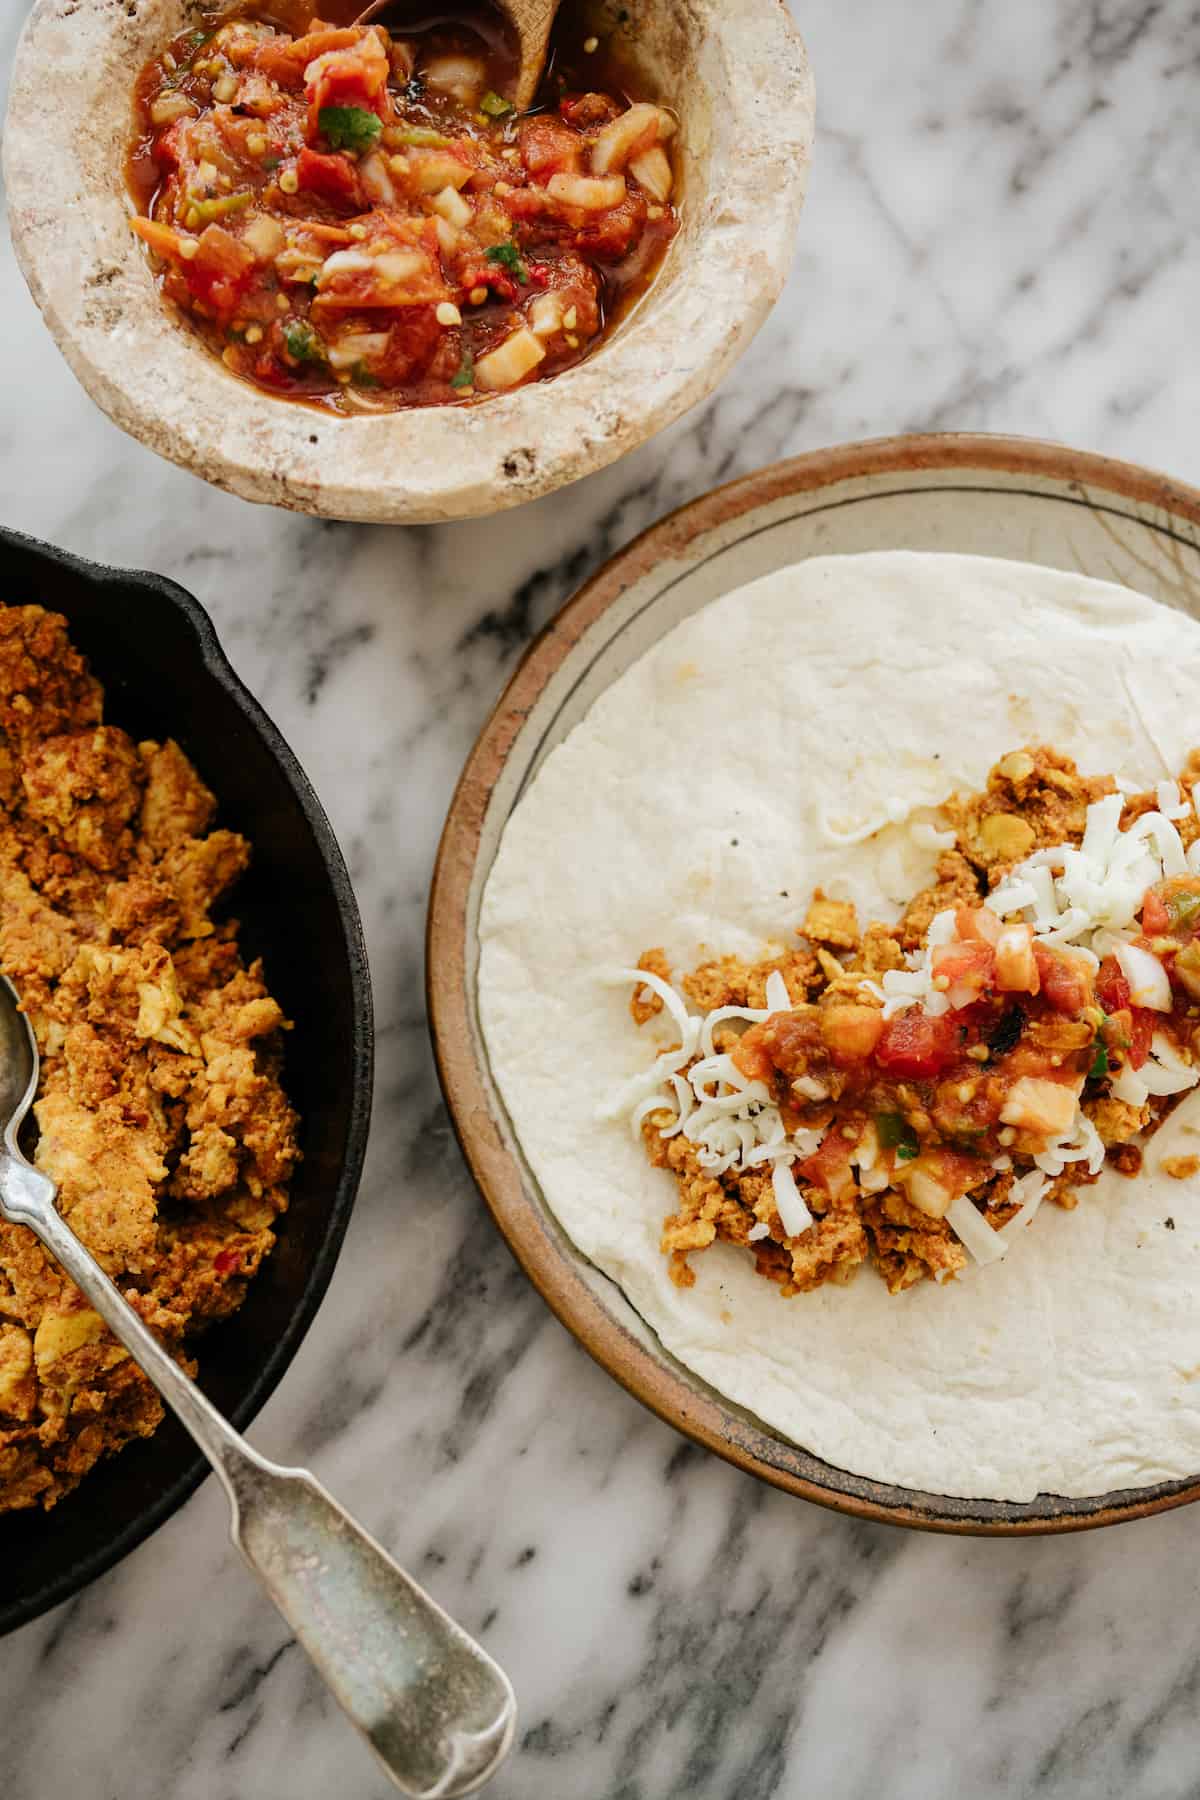 shot showing chorizo and egg breakfast burrito assembly — a plate with an open-faced tortilla layered with breakfast burrito ingredients next to a cast iron pan of the egg and chorizo mix and a bowl of salsa.